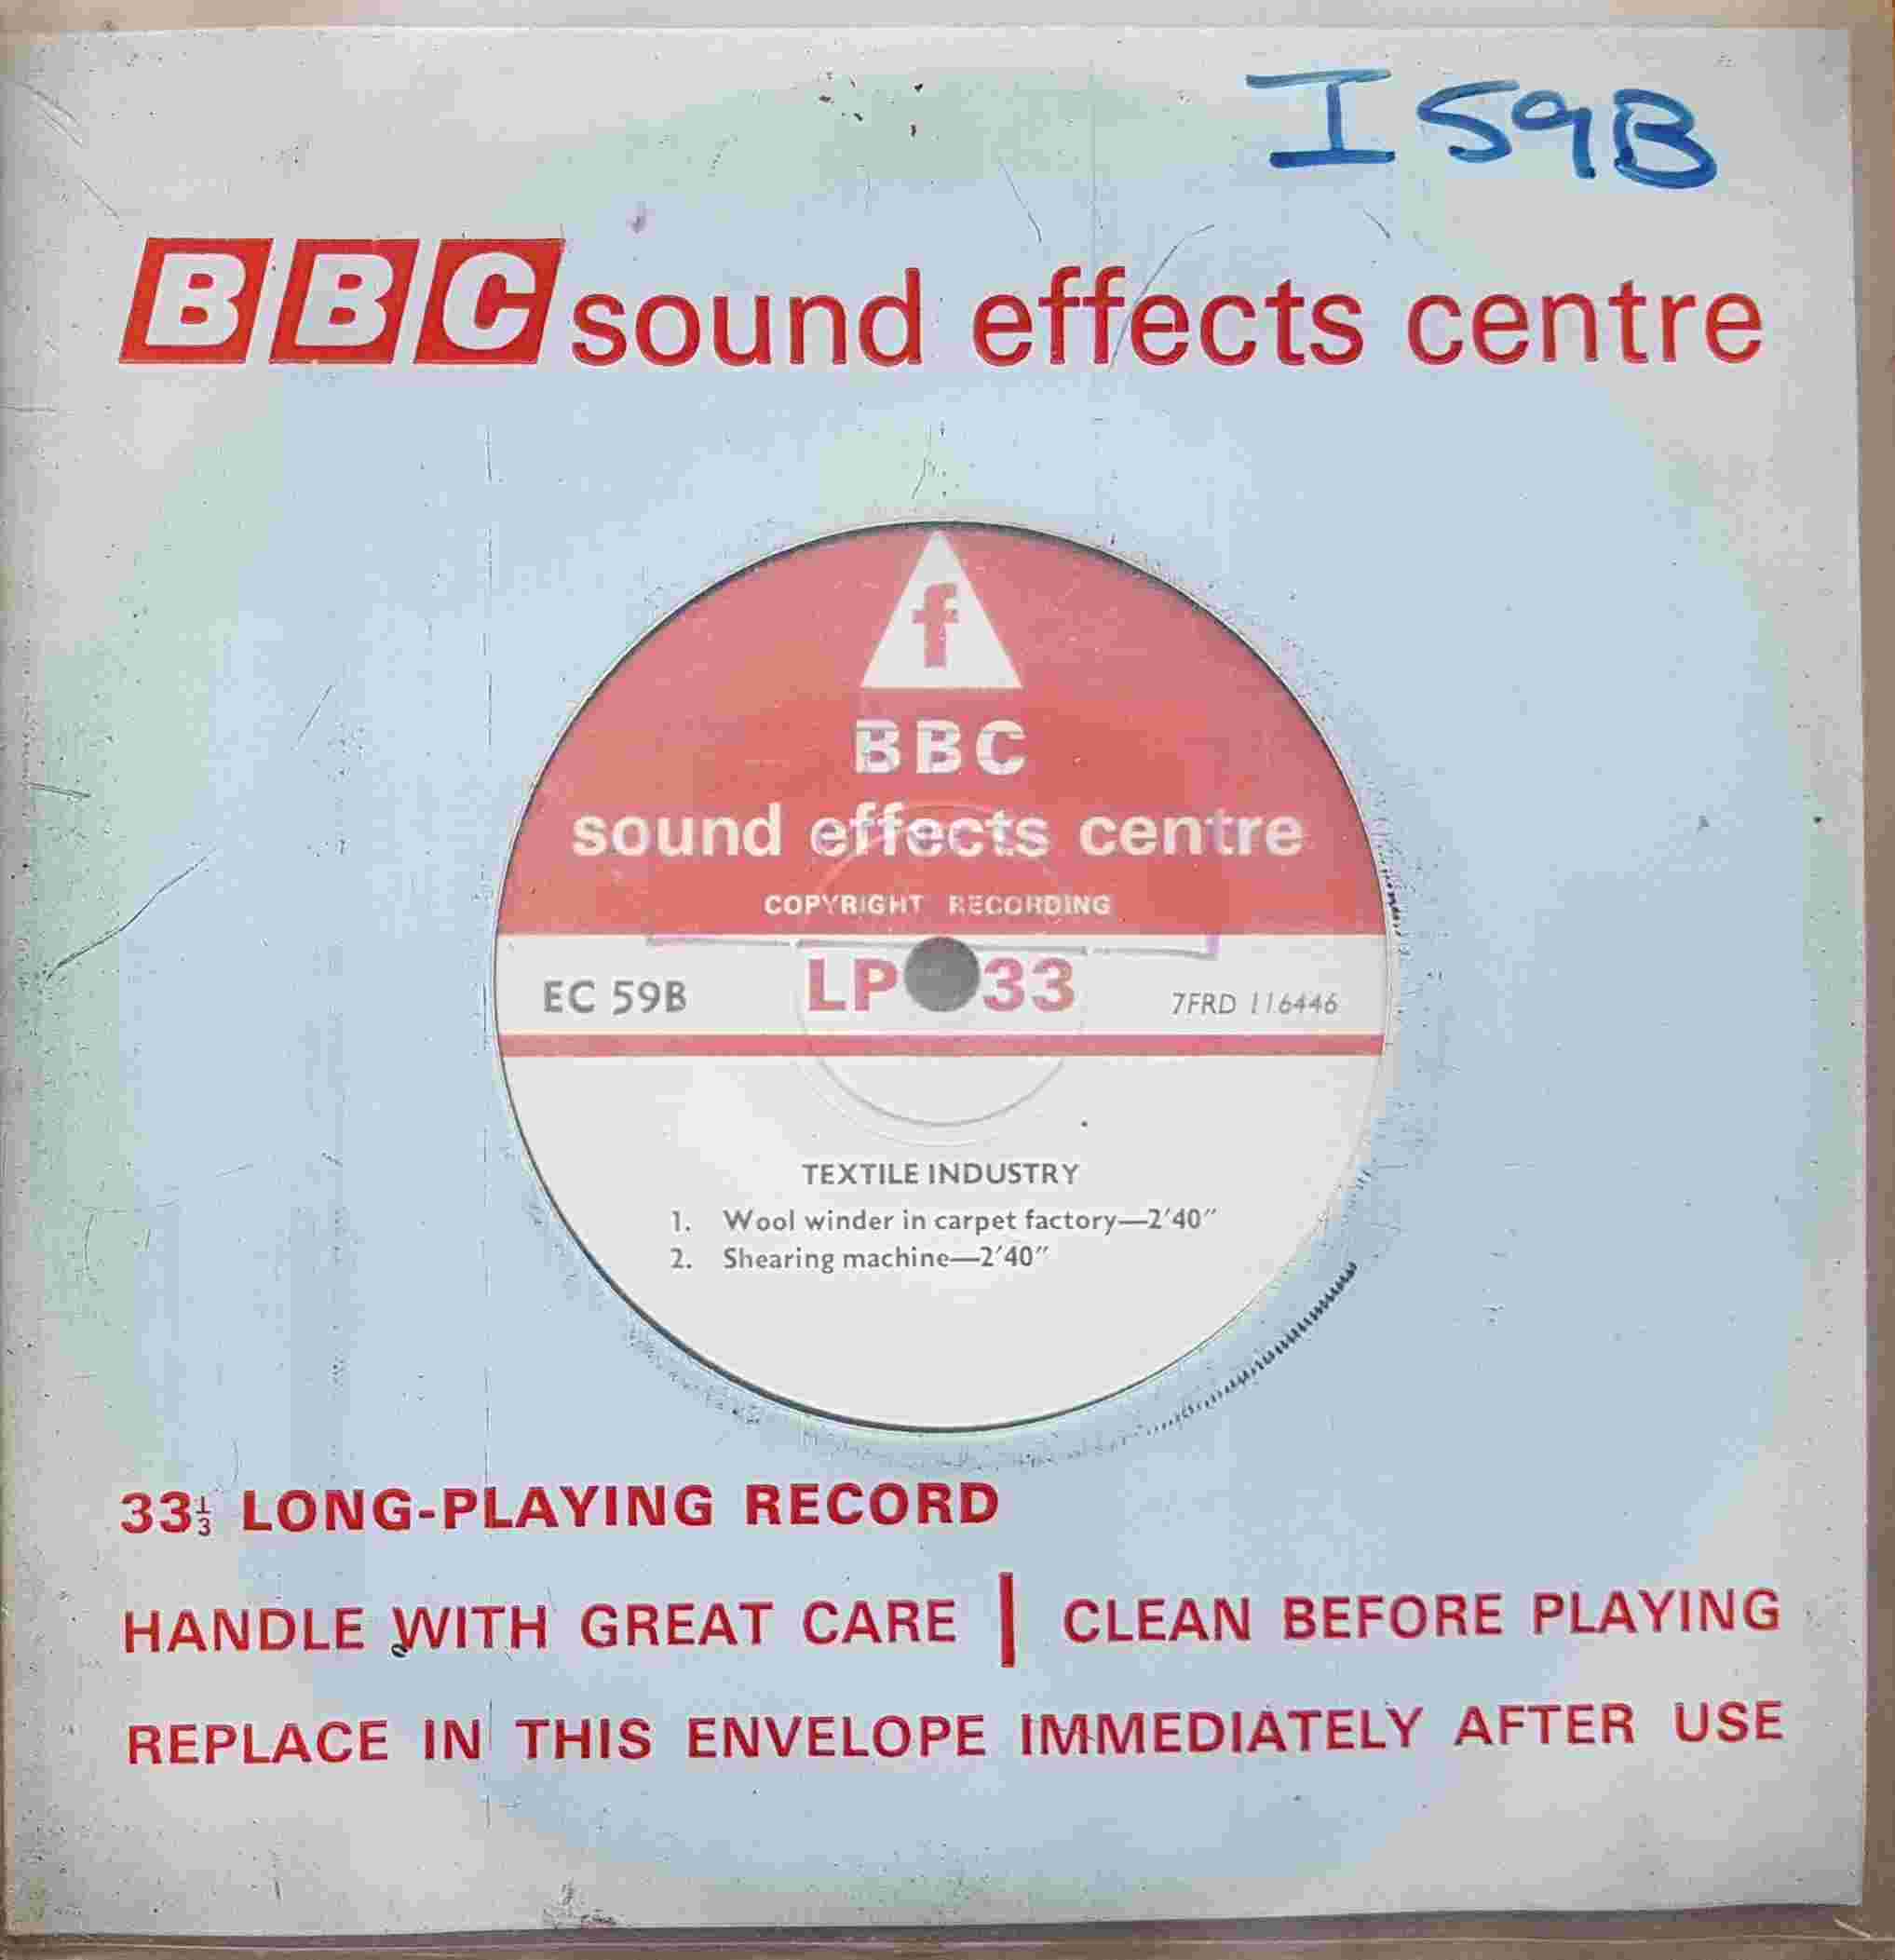 Picture of EC 59B Textile industry by artist Not registered from the BBC singles - Records and Tapes library